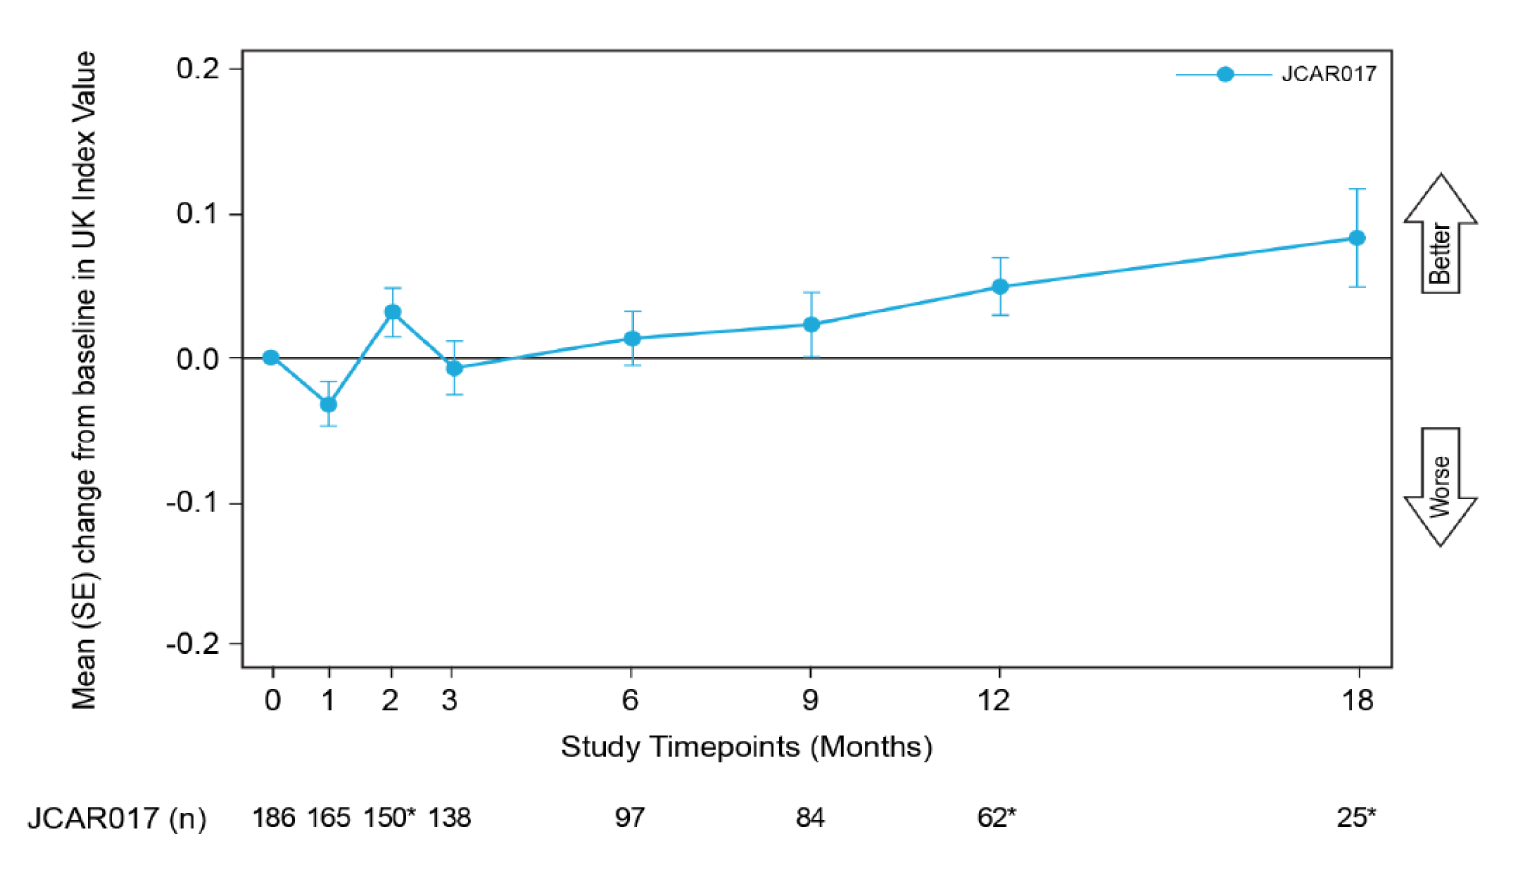 This figure depicts the mean change from baseline in EQ-5D-5L score, increasing to 0.02 points at 12 months, and growing steadily to nearly 0.05 points by 18 months.